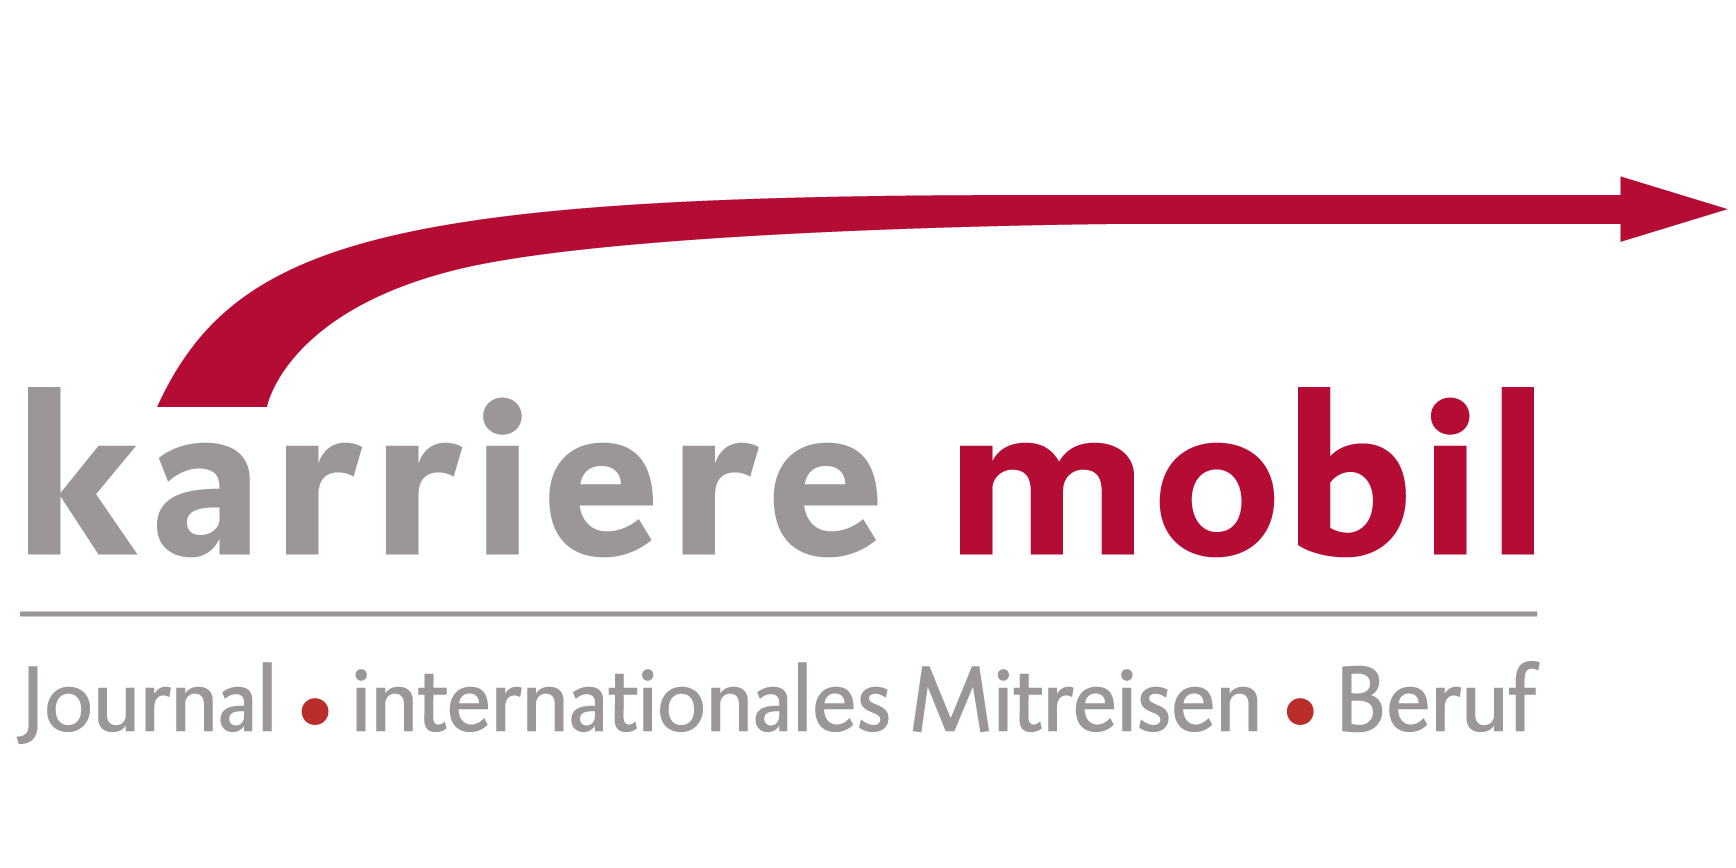 karriere mobil